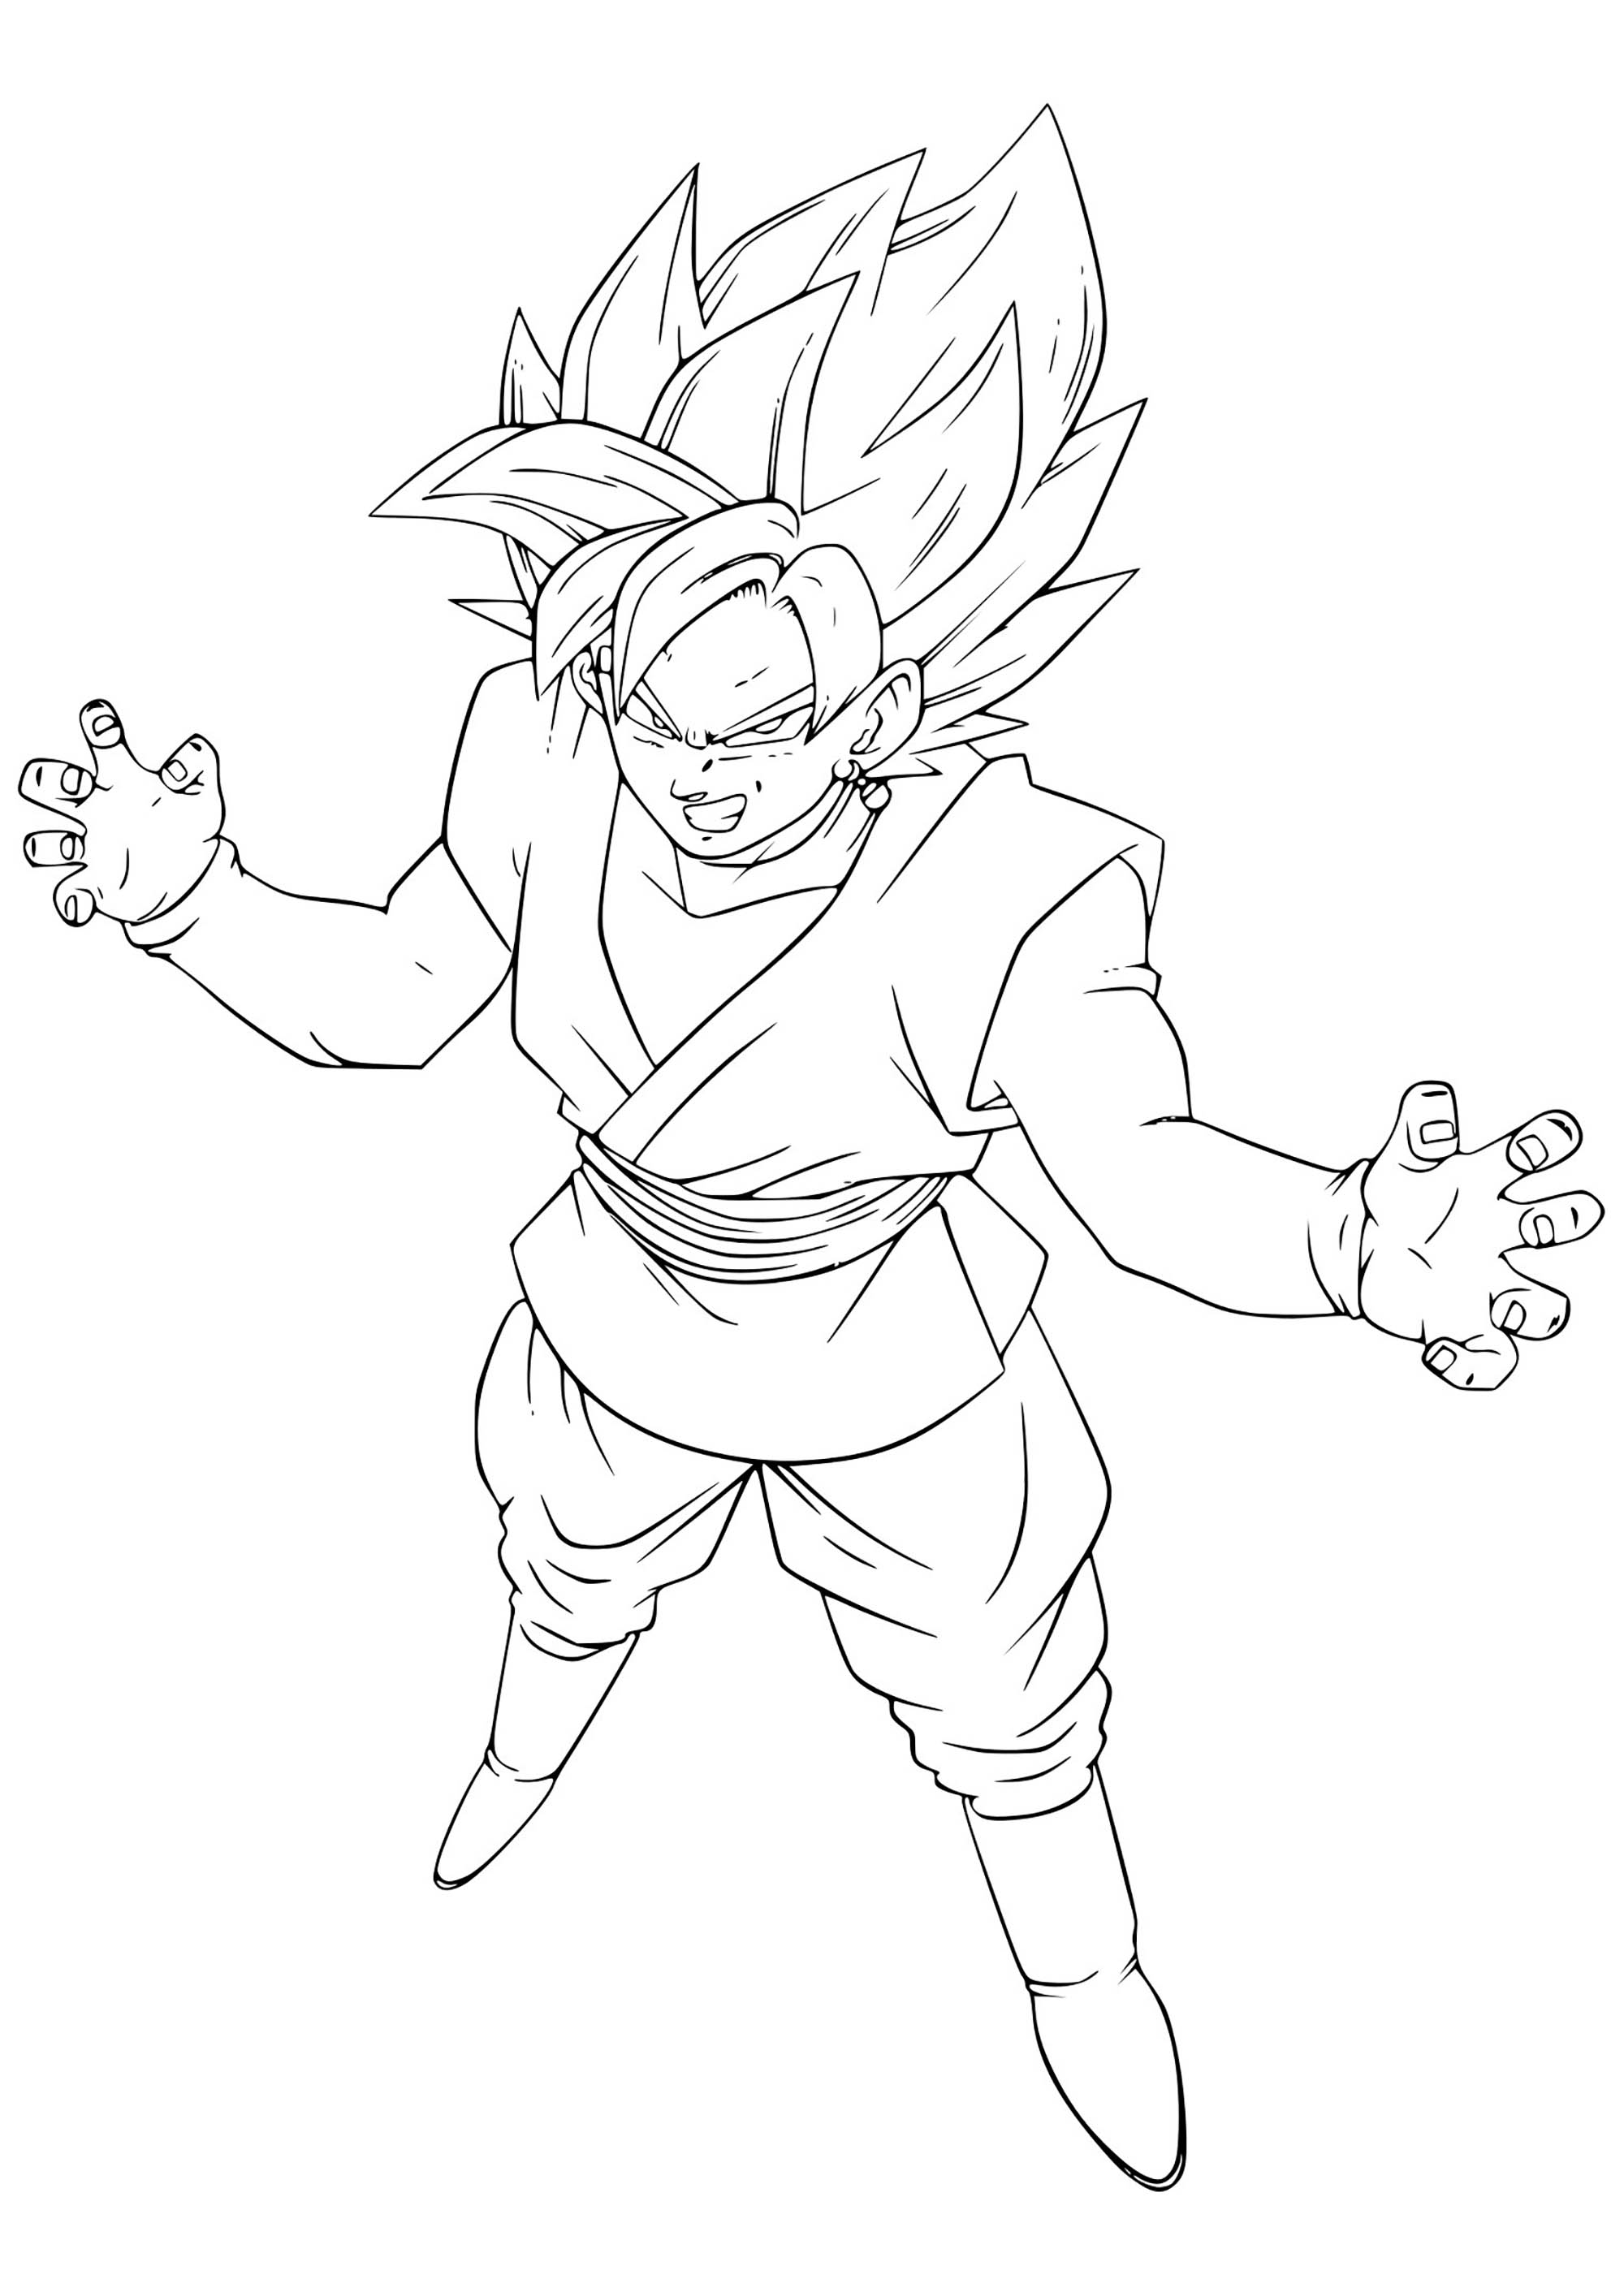 321 Goku Free Colouring Pages